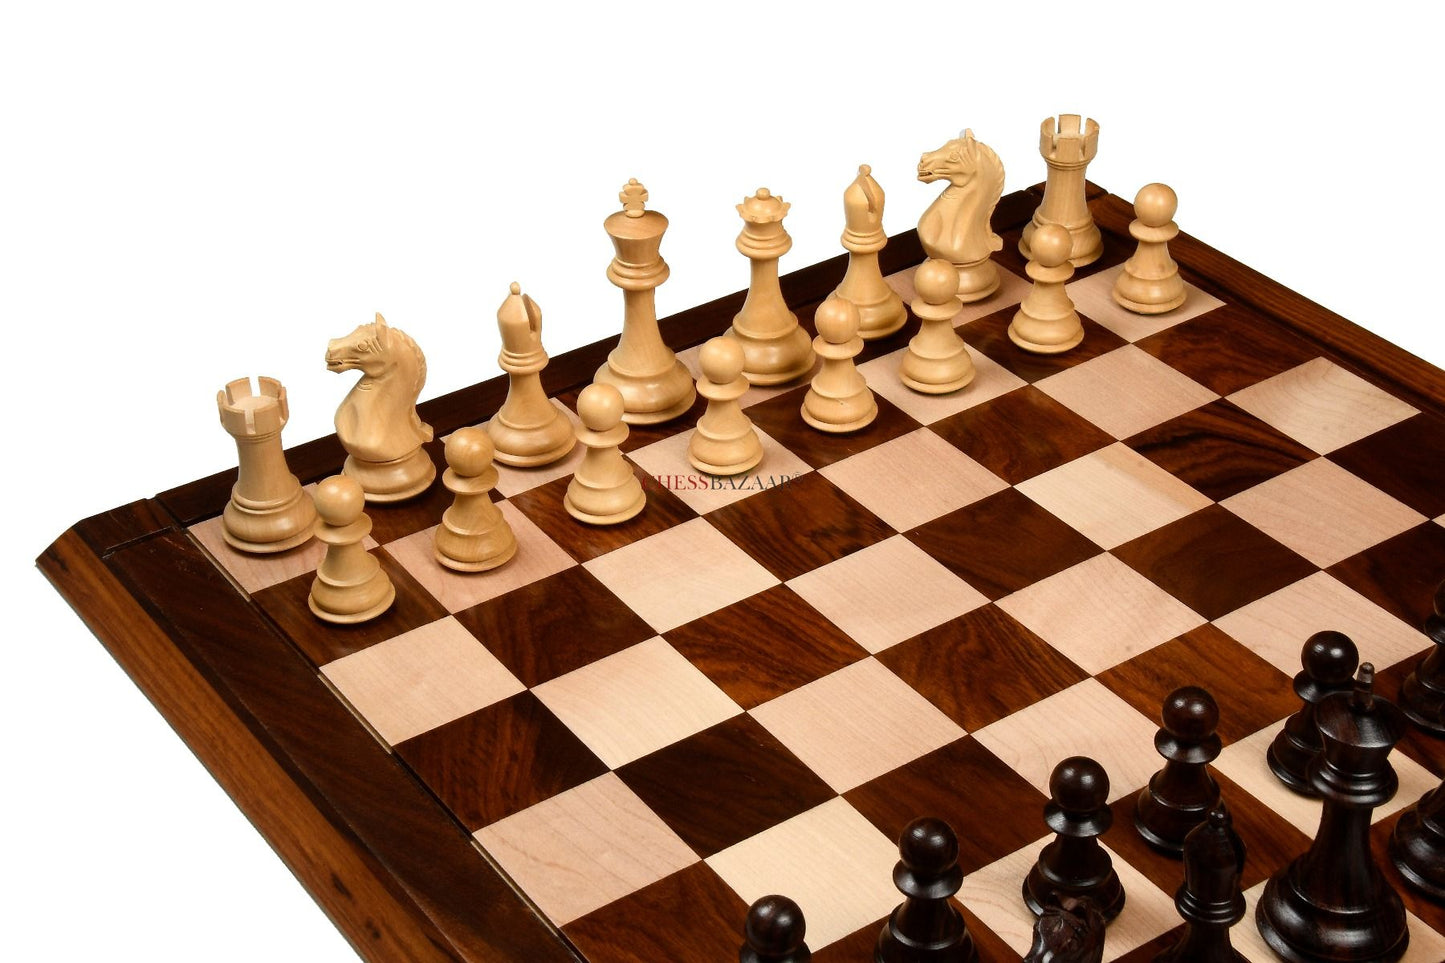 Combo of Fierce Knight Staunton Series Chess Pieces in Rosewood & Box Wood - 4.1" King with Wooden Chess Board 21"